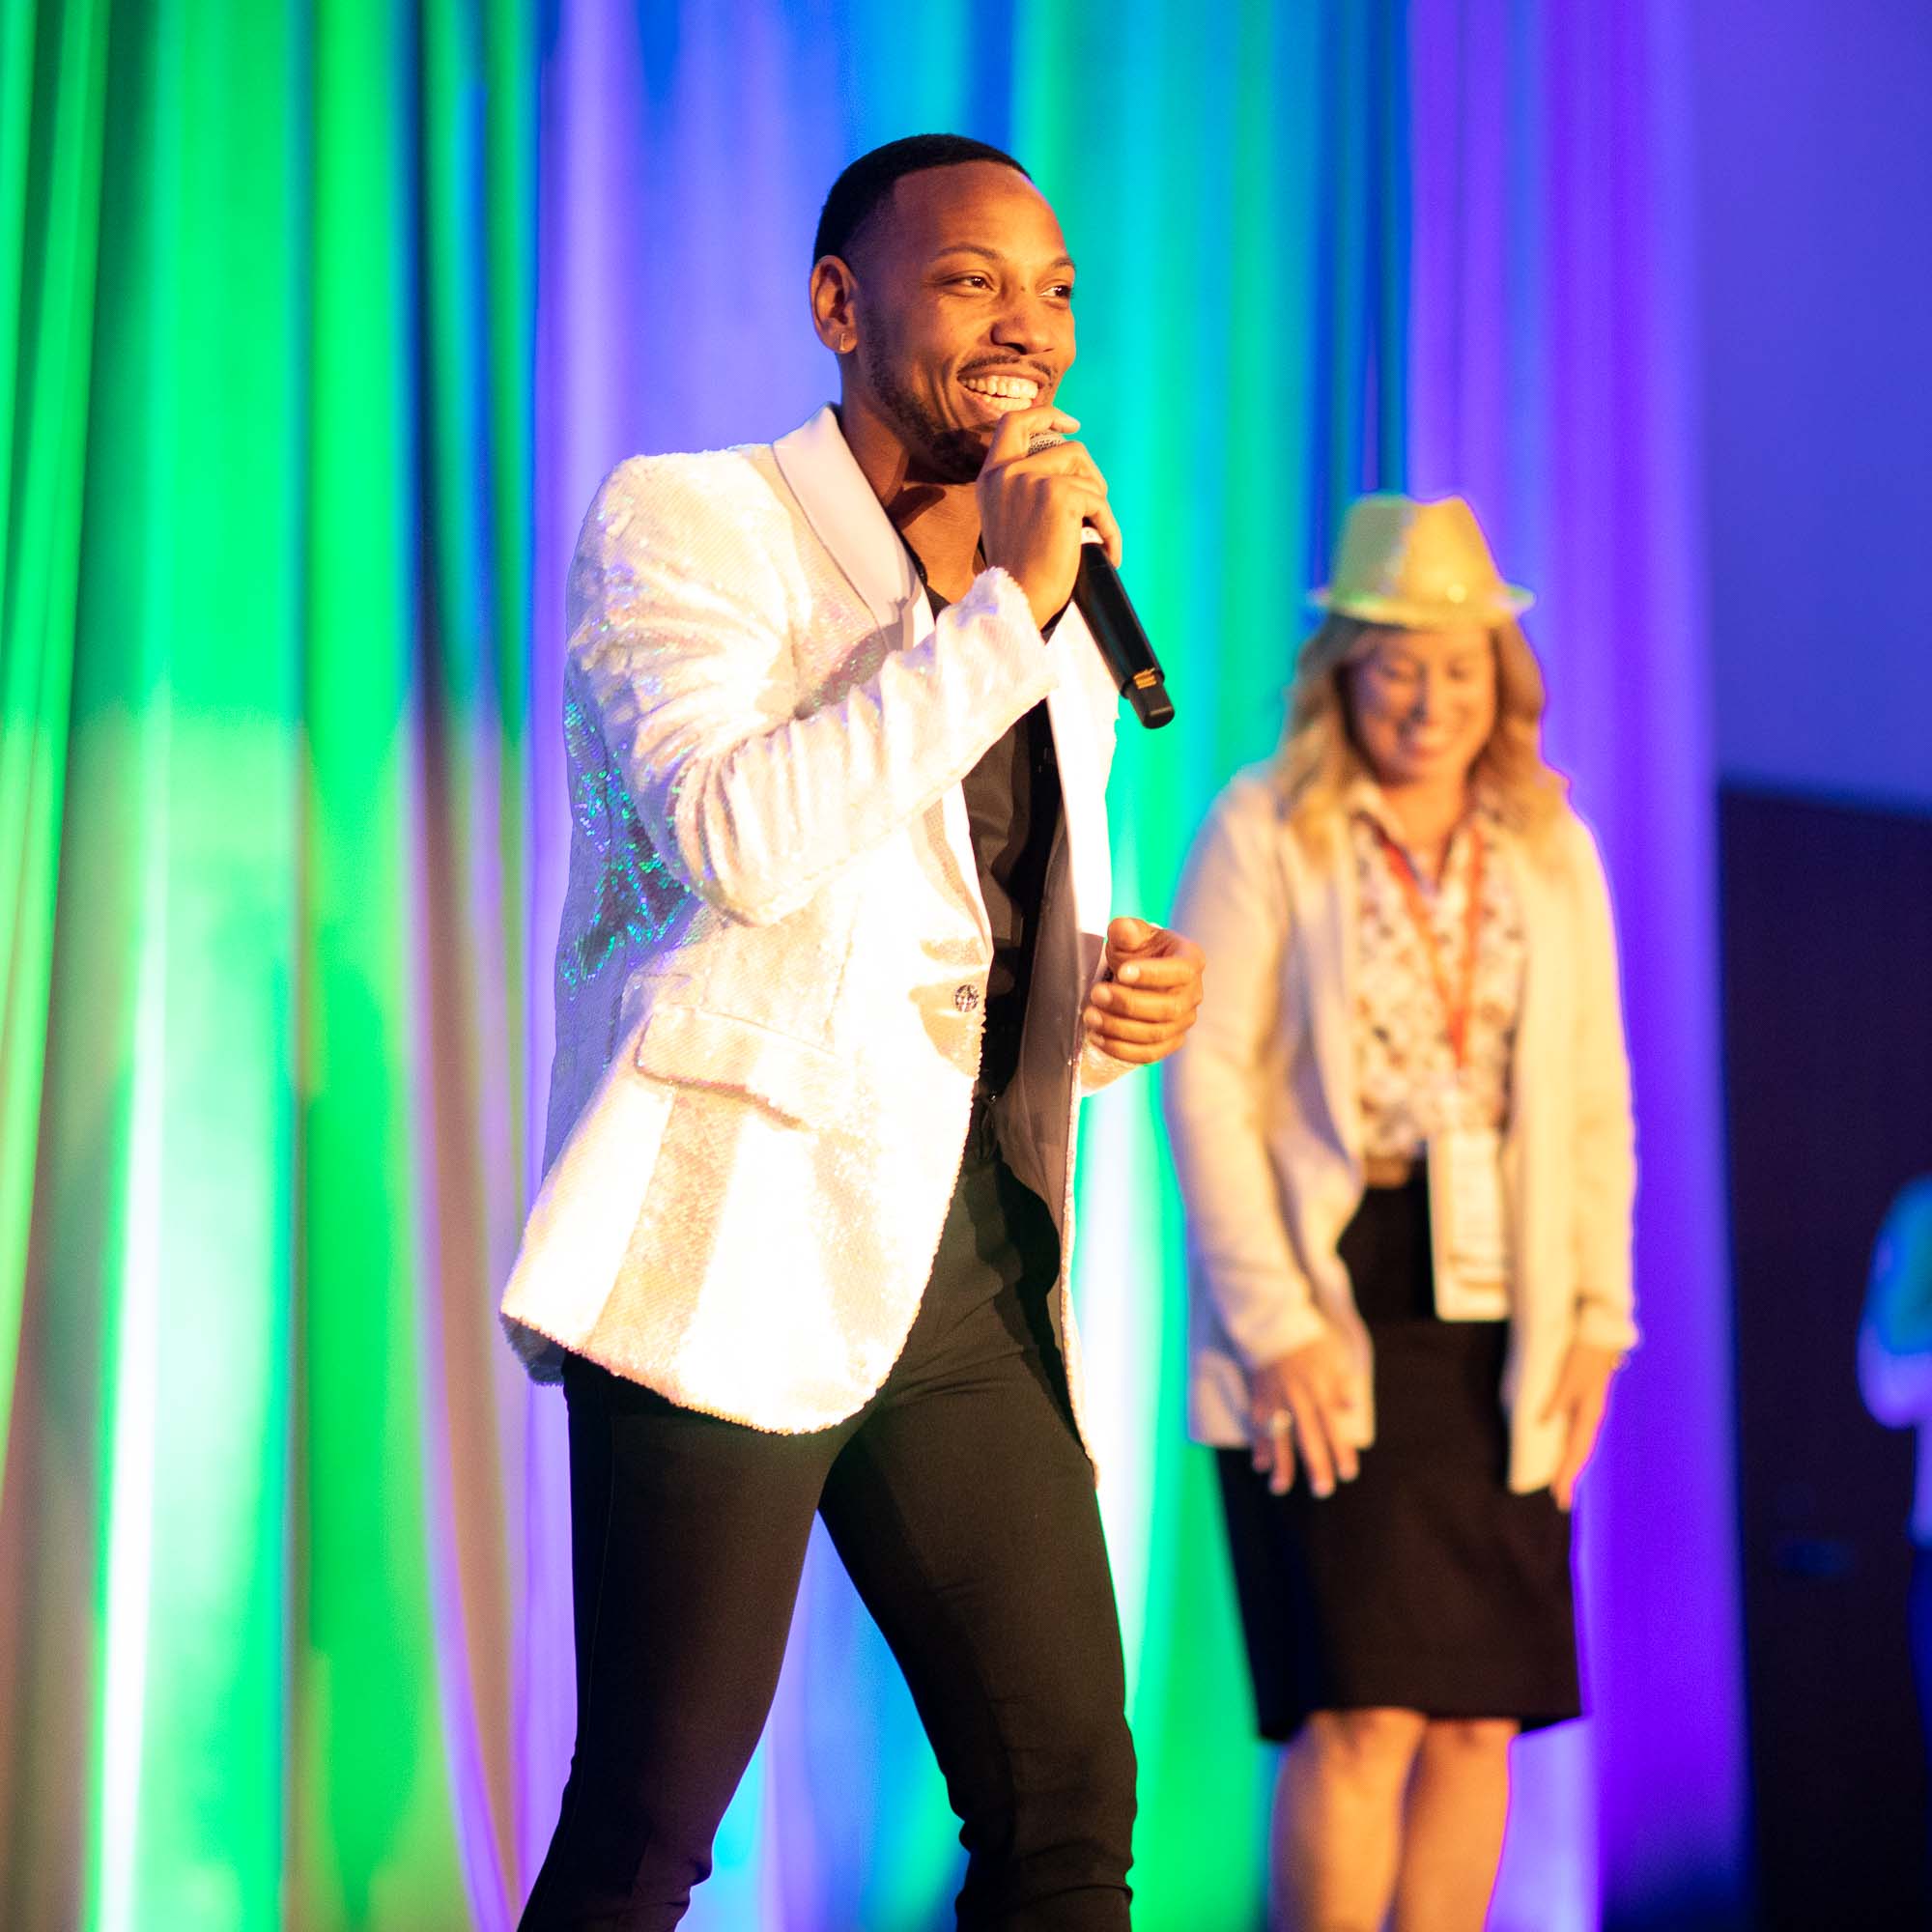 Singer on stage at corporate event smiling